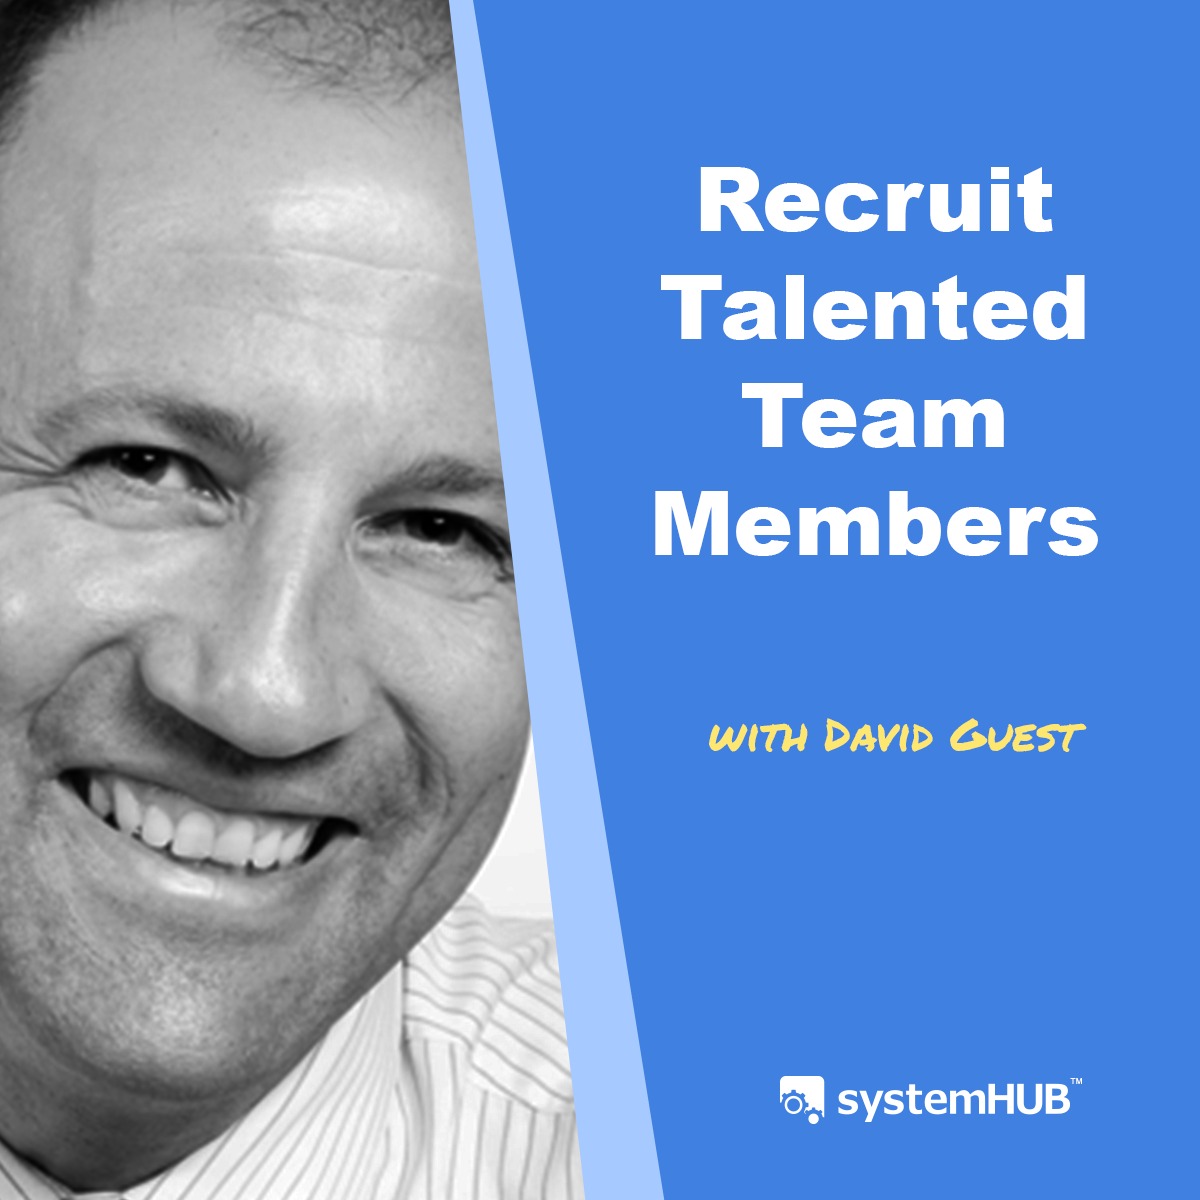 Recruiting Talented Team Members with David Guest